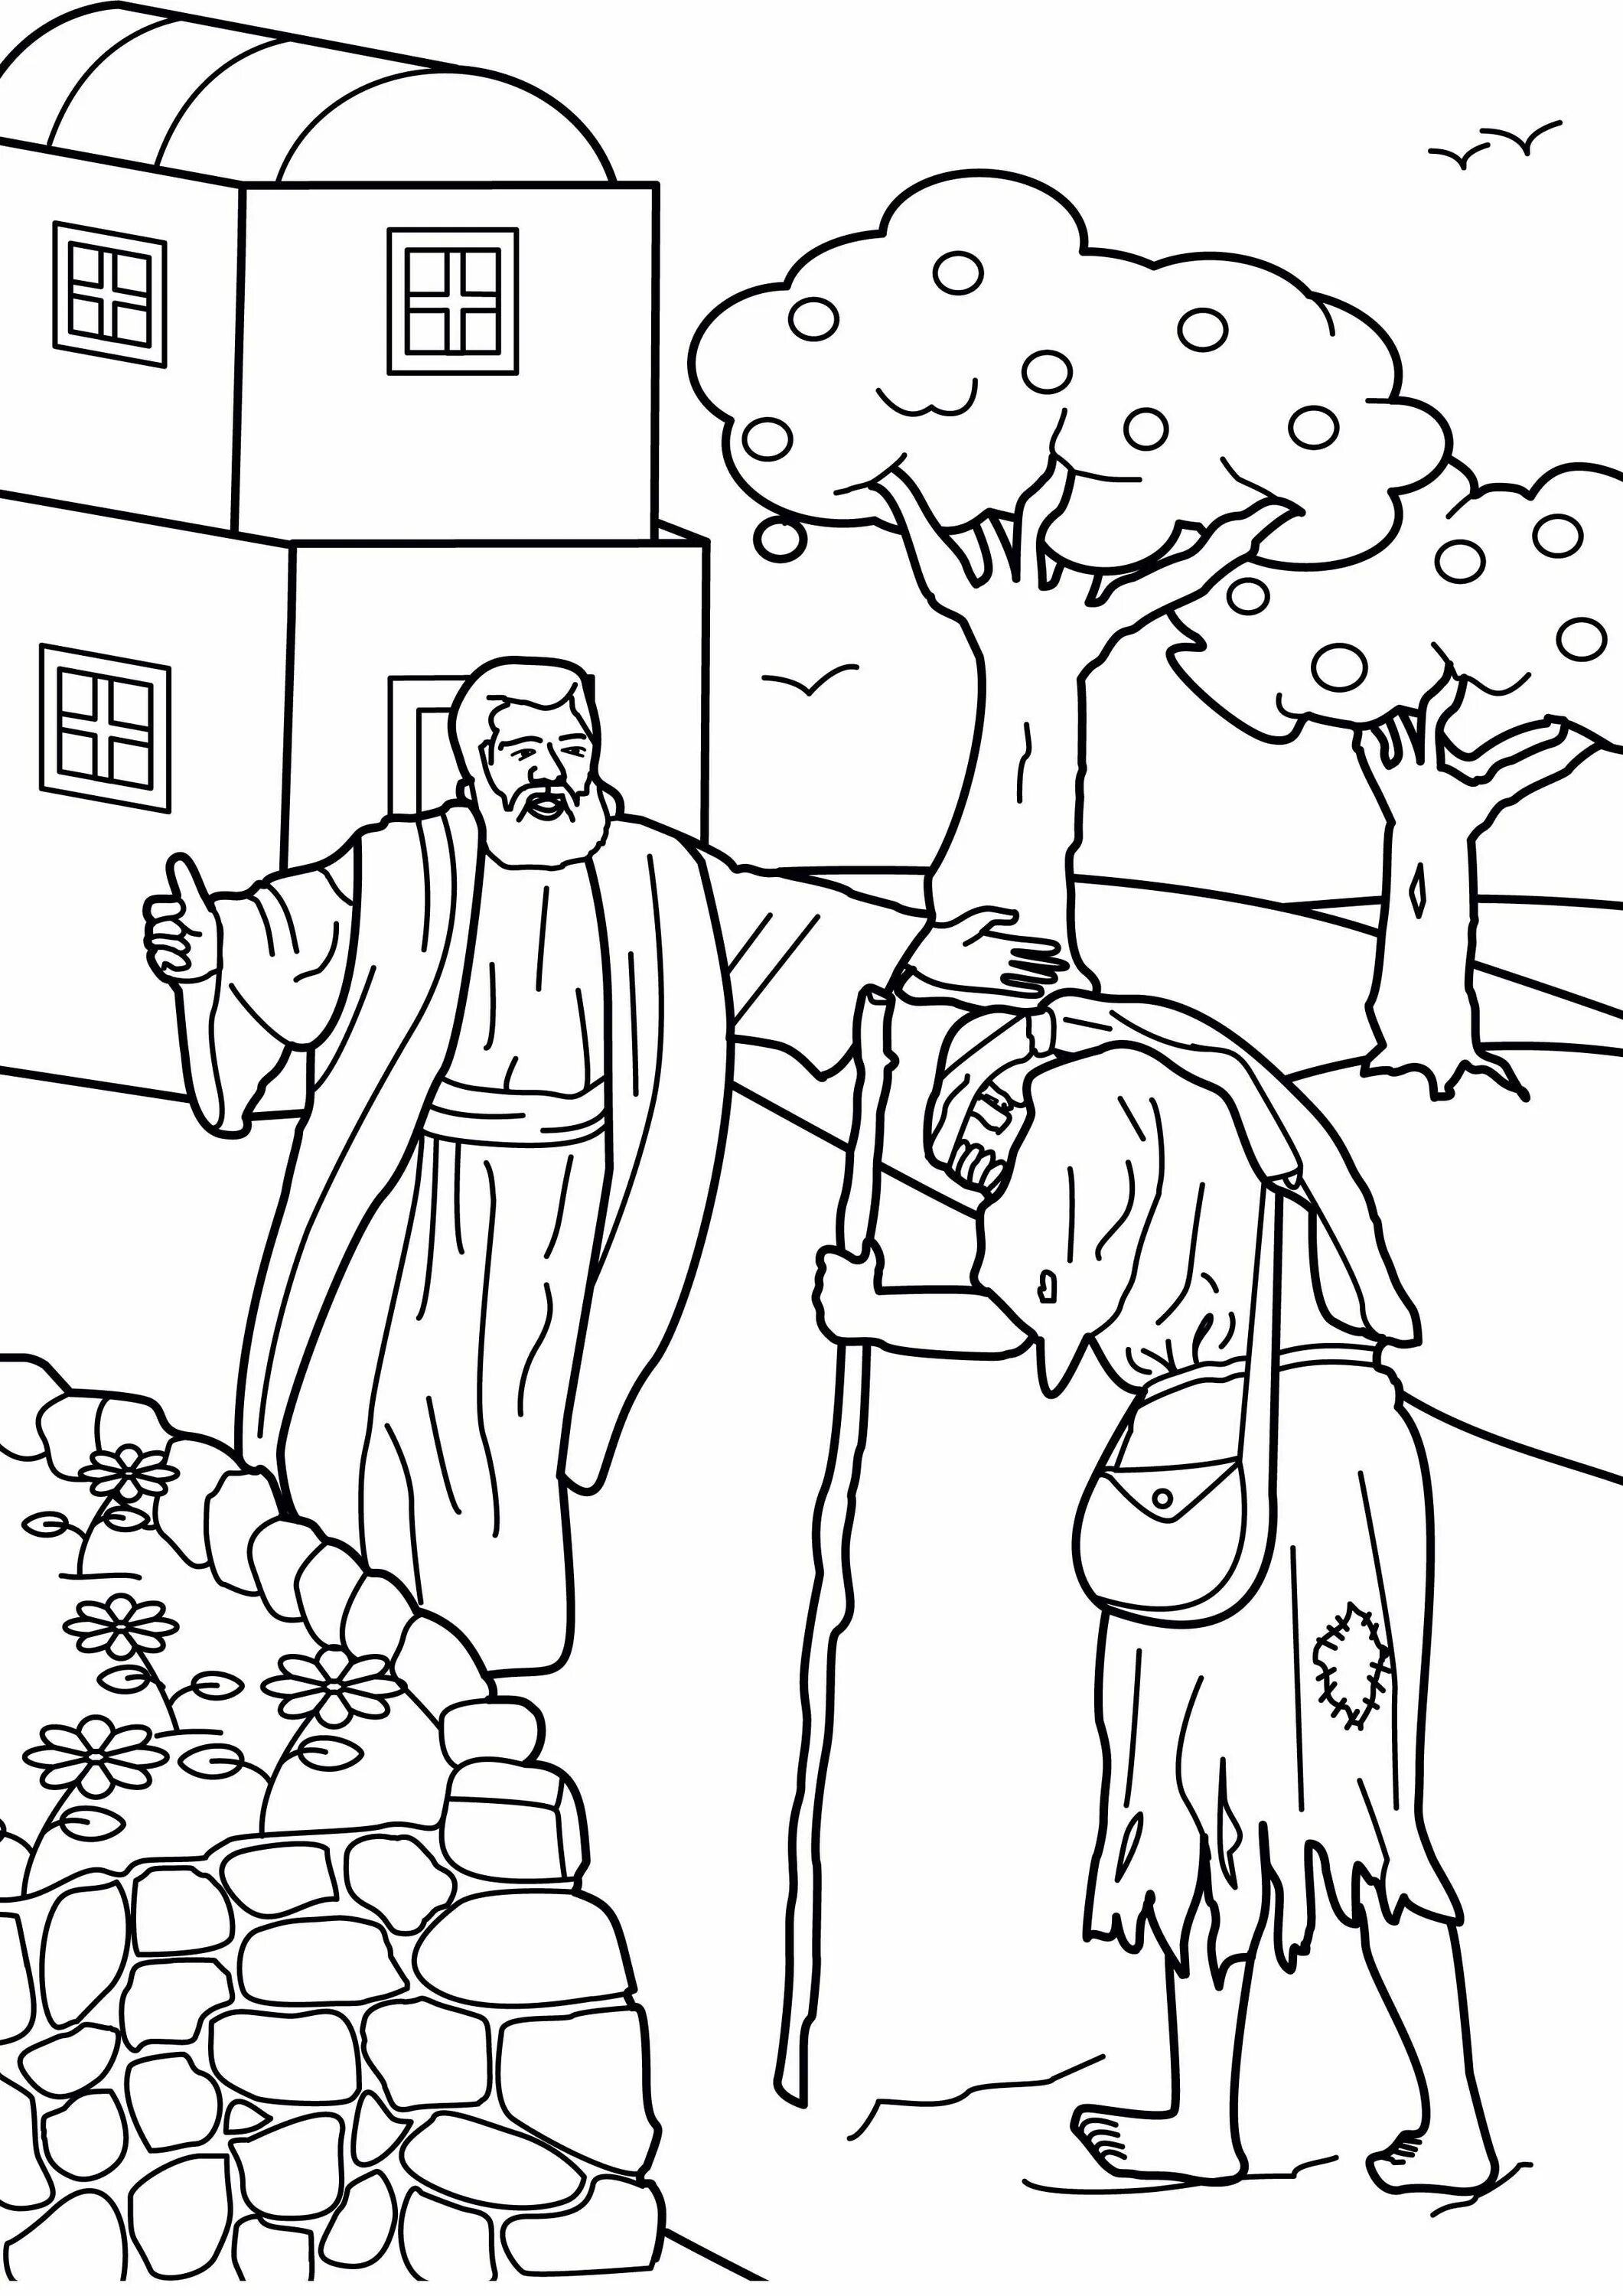 Coloring book of the week of the luminous prodigal son